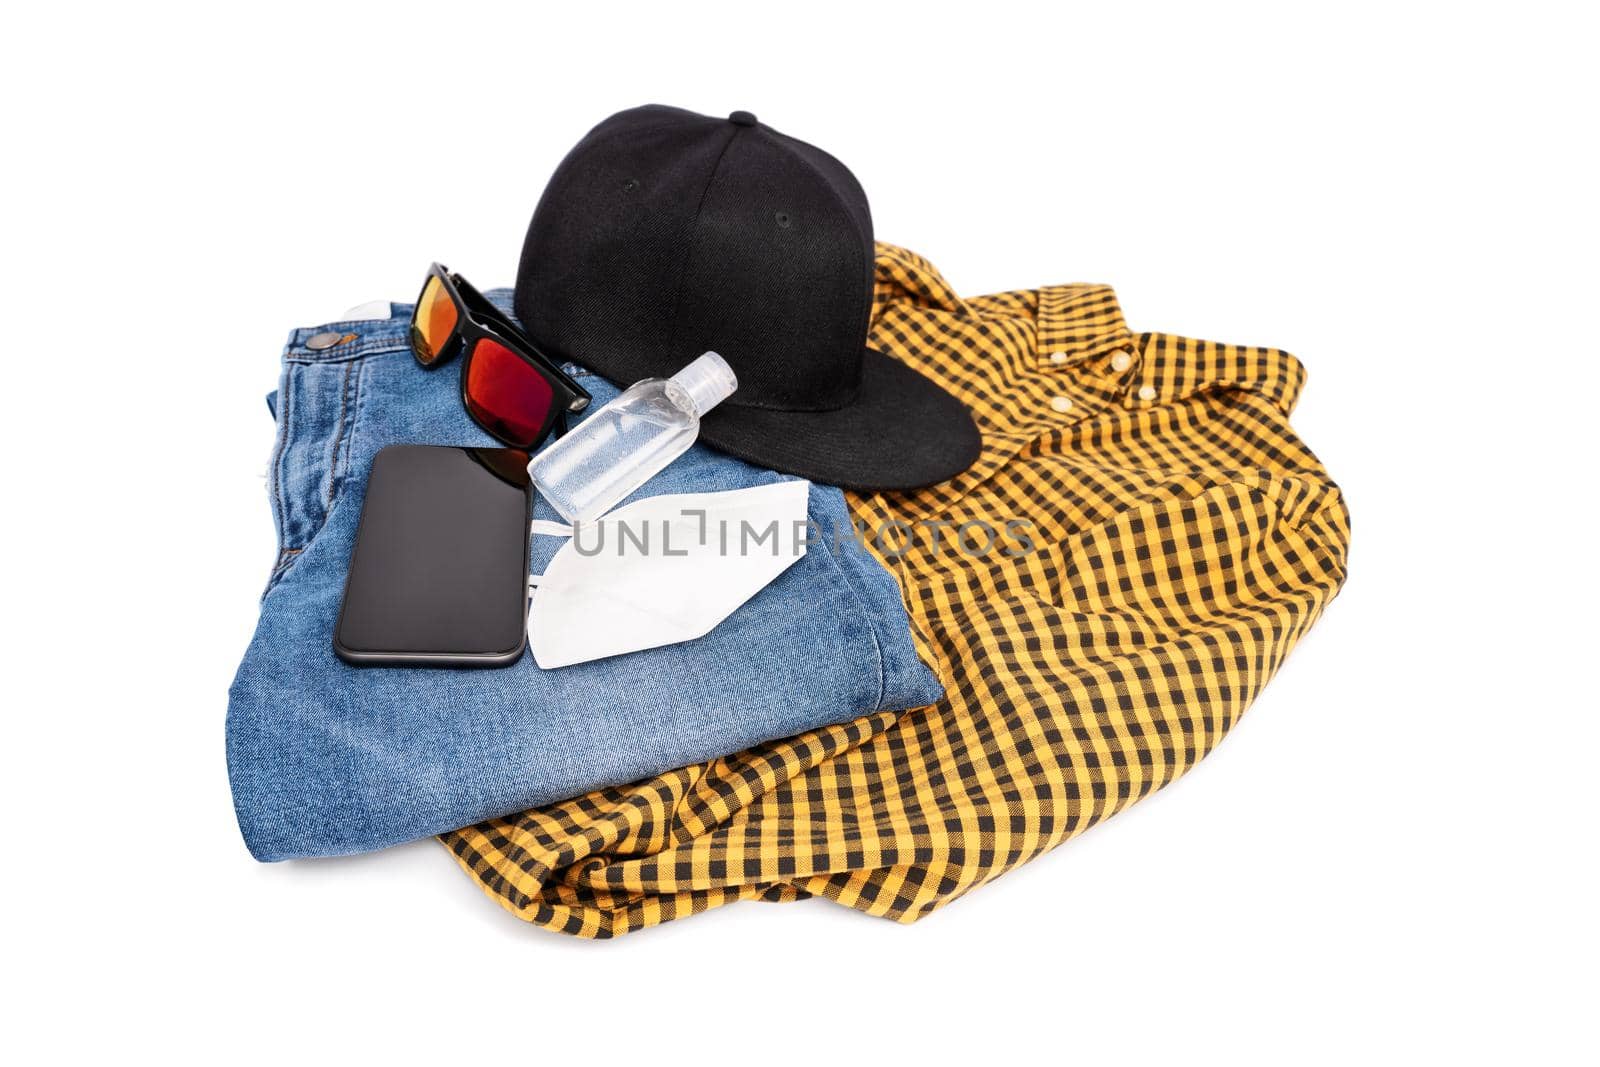 Modern stylish male outfit for the pandemic with jeans, plaid shirt, snapback cap, sunglasses, mobile phone, hand sanitizer and face mask, isolated on white background. The COVID-19 new normal.